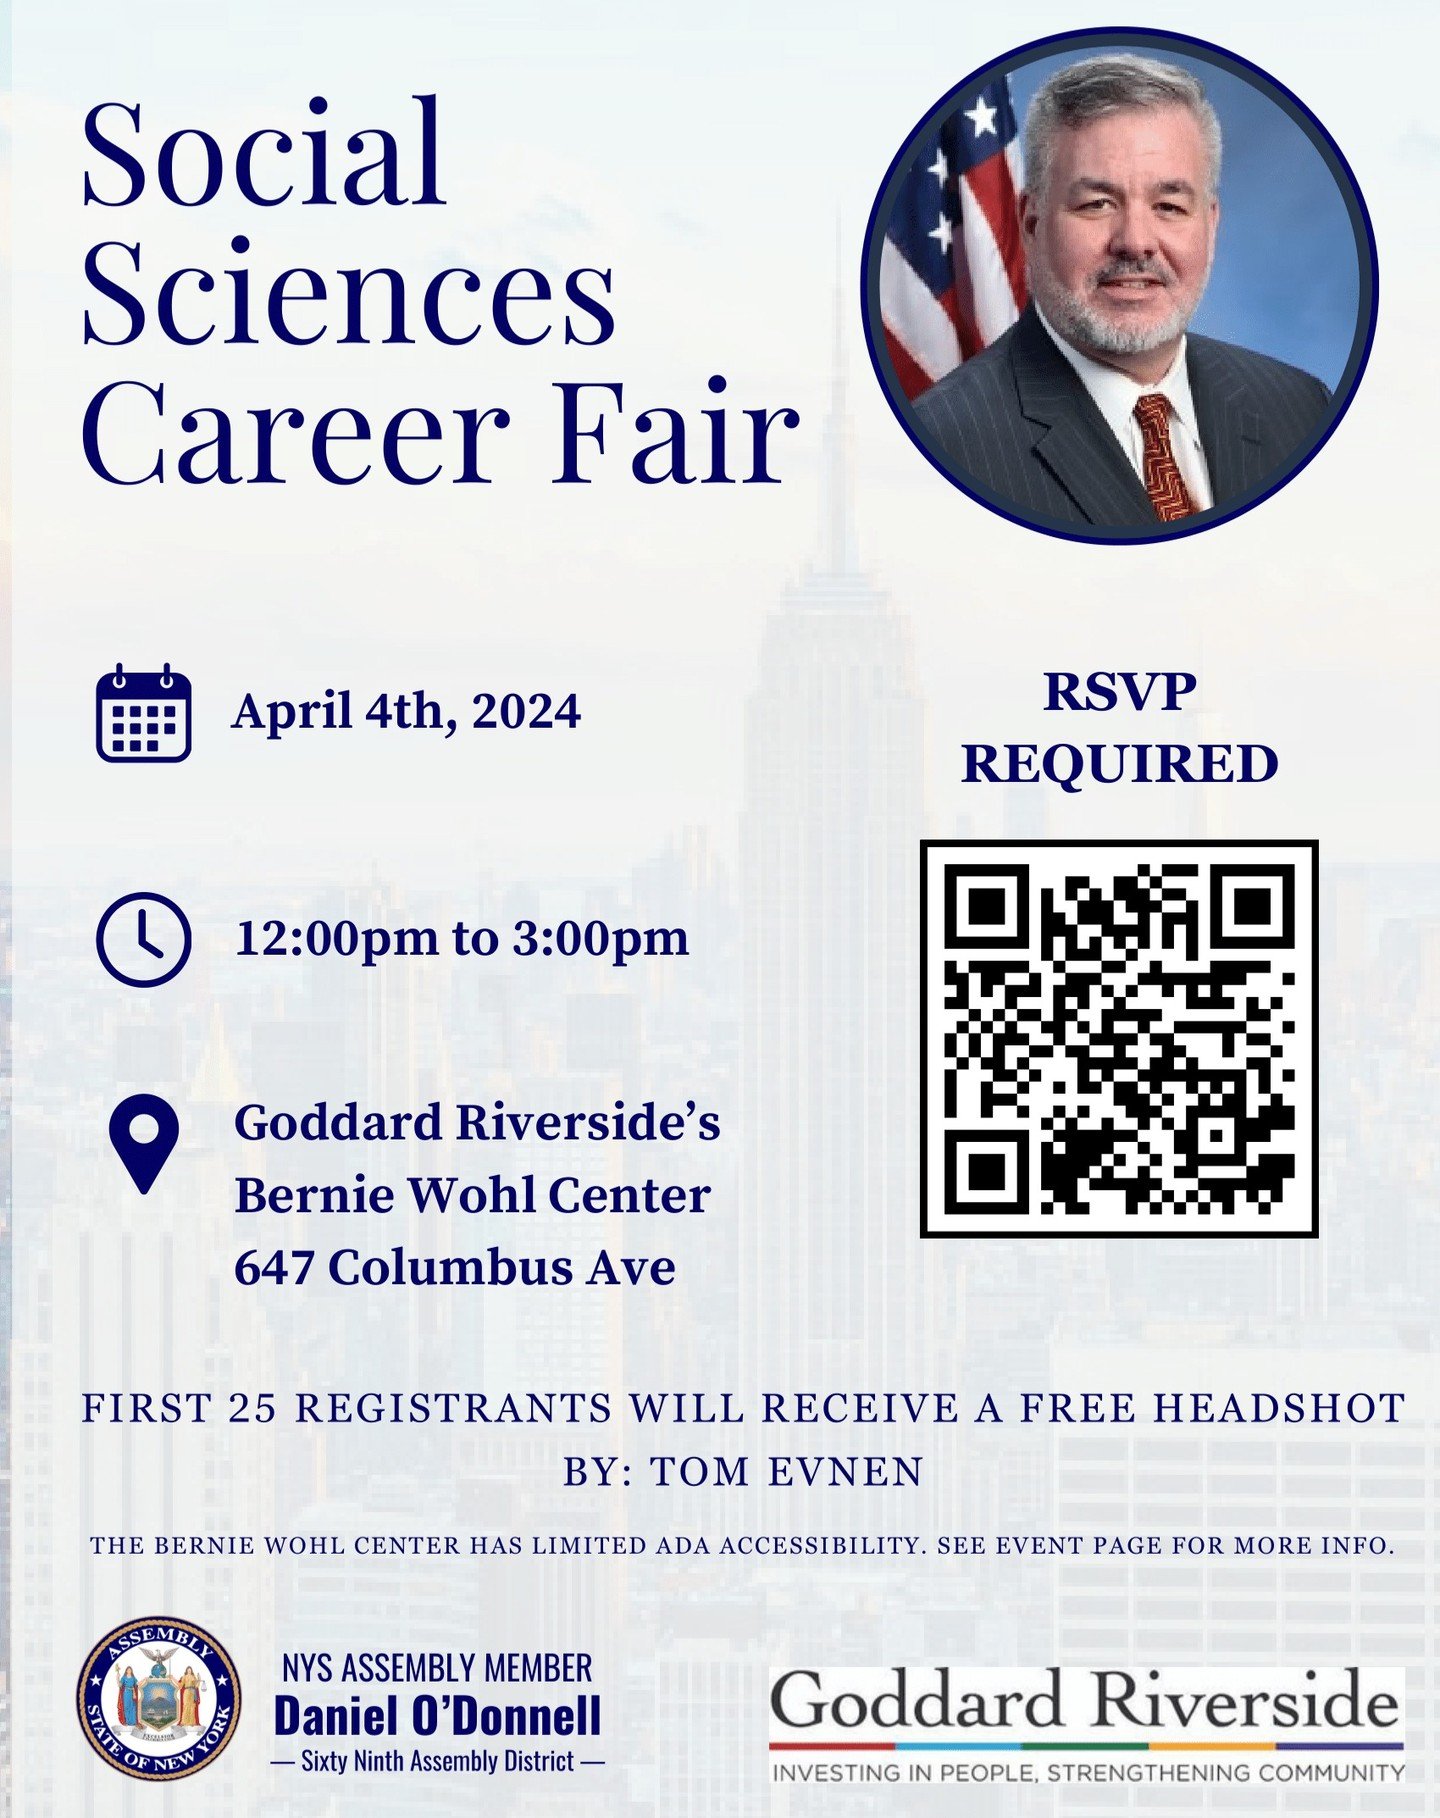 Assembly Member Danny O'Donnell's office is hosting his first ever Career Fair on Thursday, April 4 at Goddard Riverside's Bernie Wohl Center. This event is specifically centered around careers in the social sciences and they are offering free profes